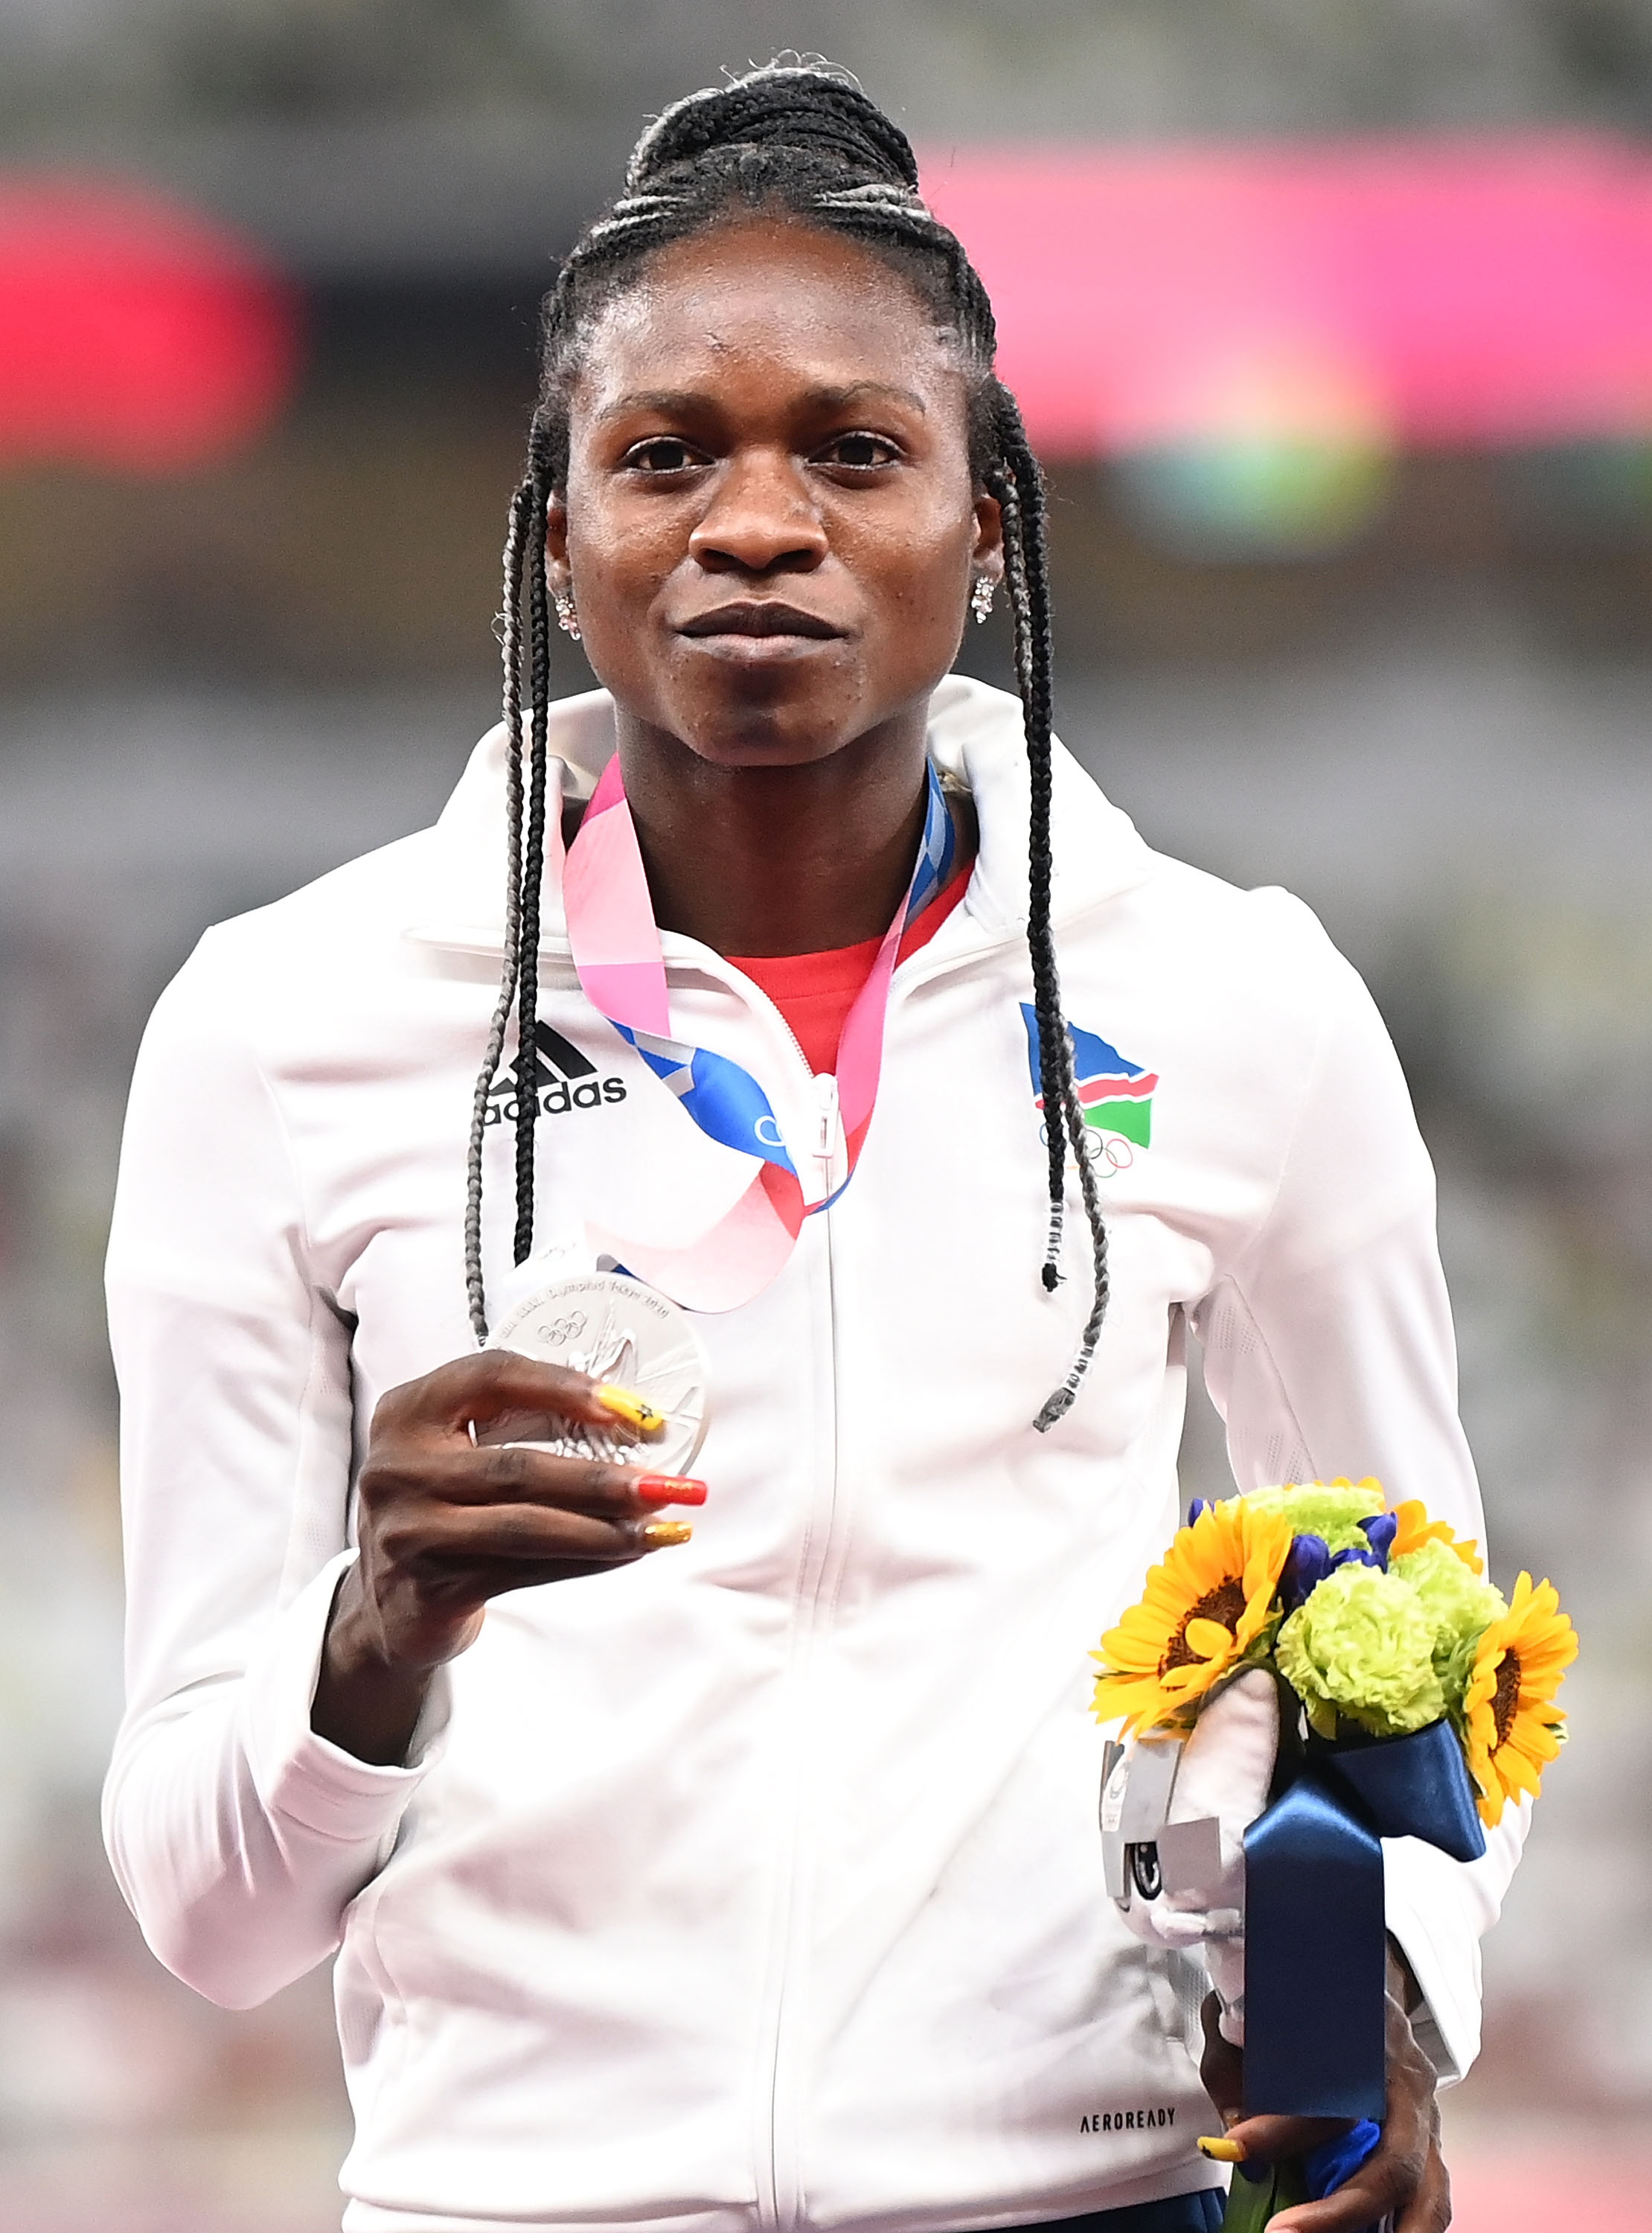 Former Athlete Demands Gender Test For Silver Medalist Christine Mboma Because She's Too Fast